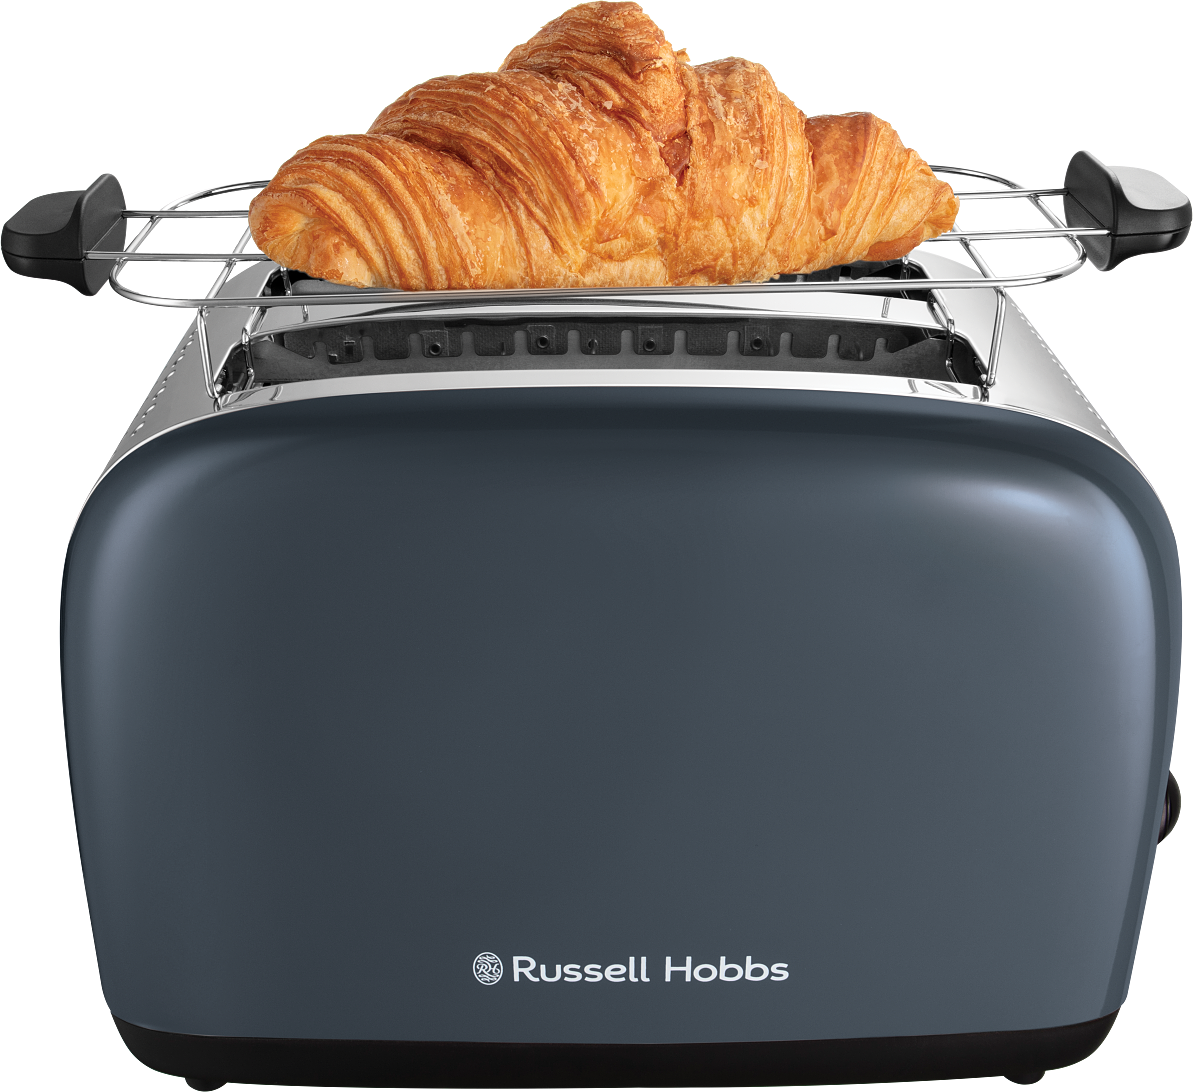 Russell Hobbs_Colours Plus Toaster_Storm Grey_59,99 Euro (3)